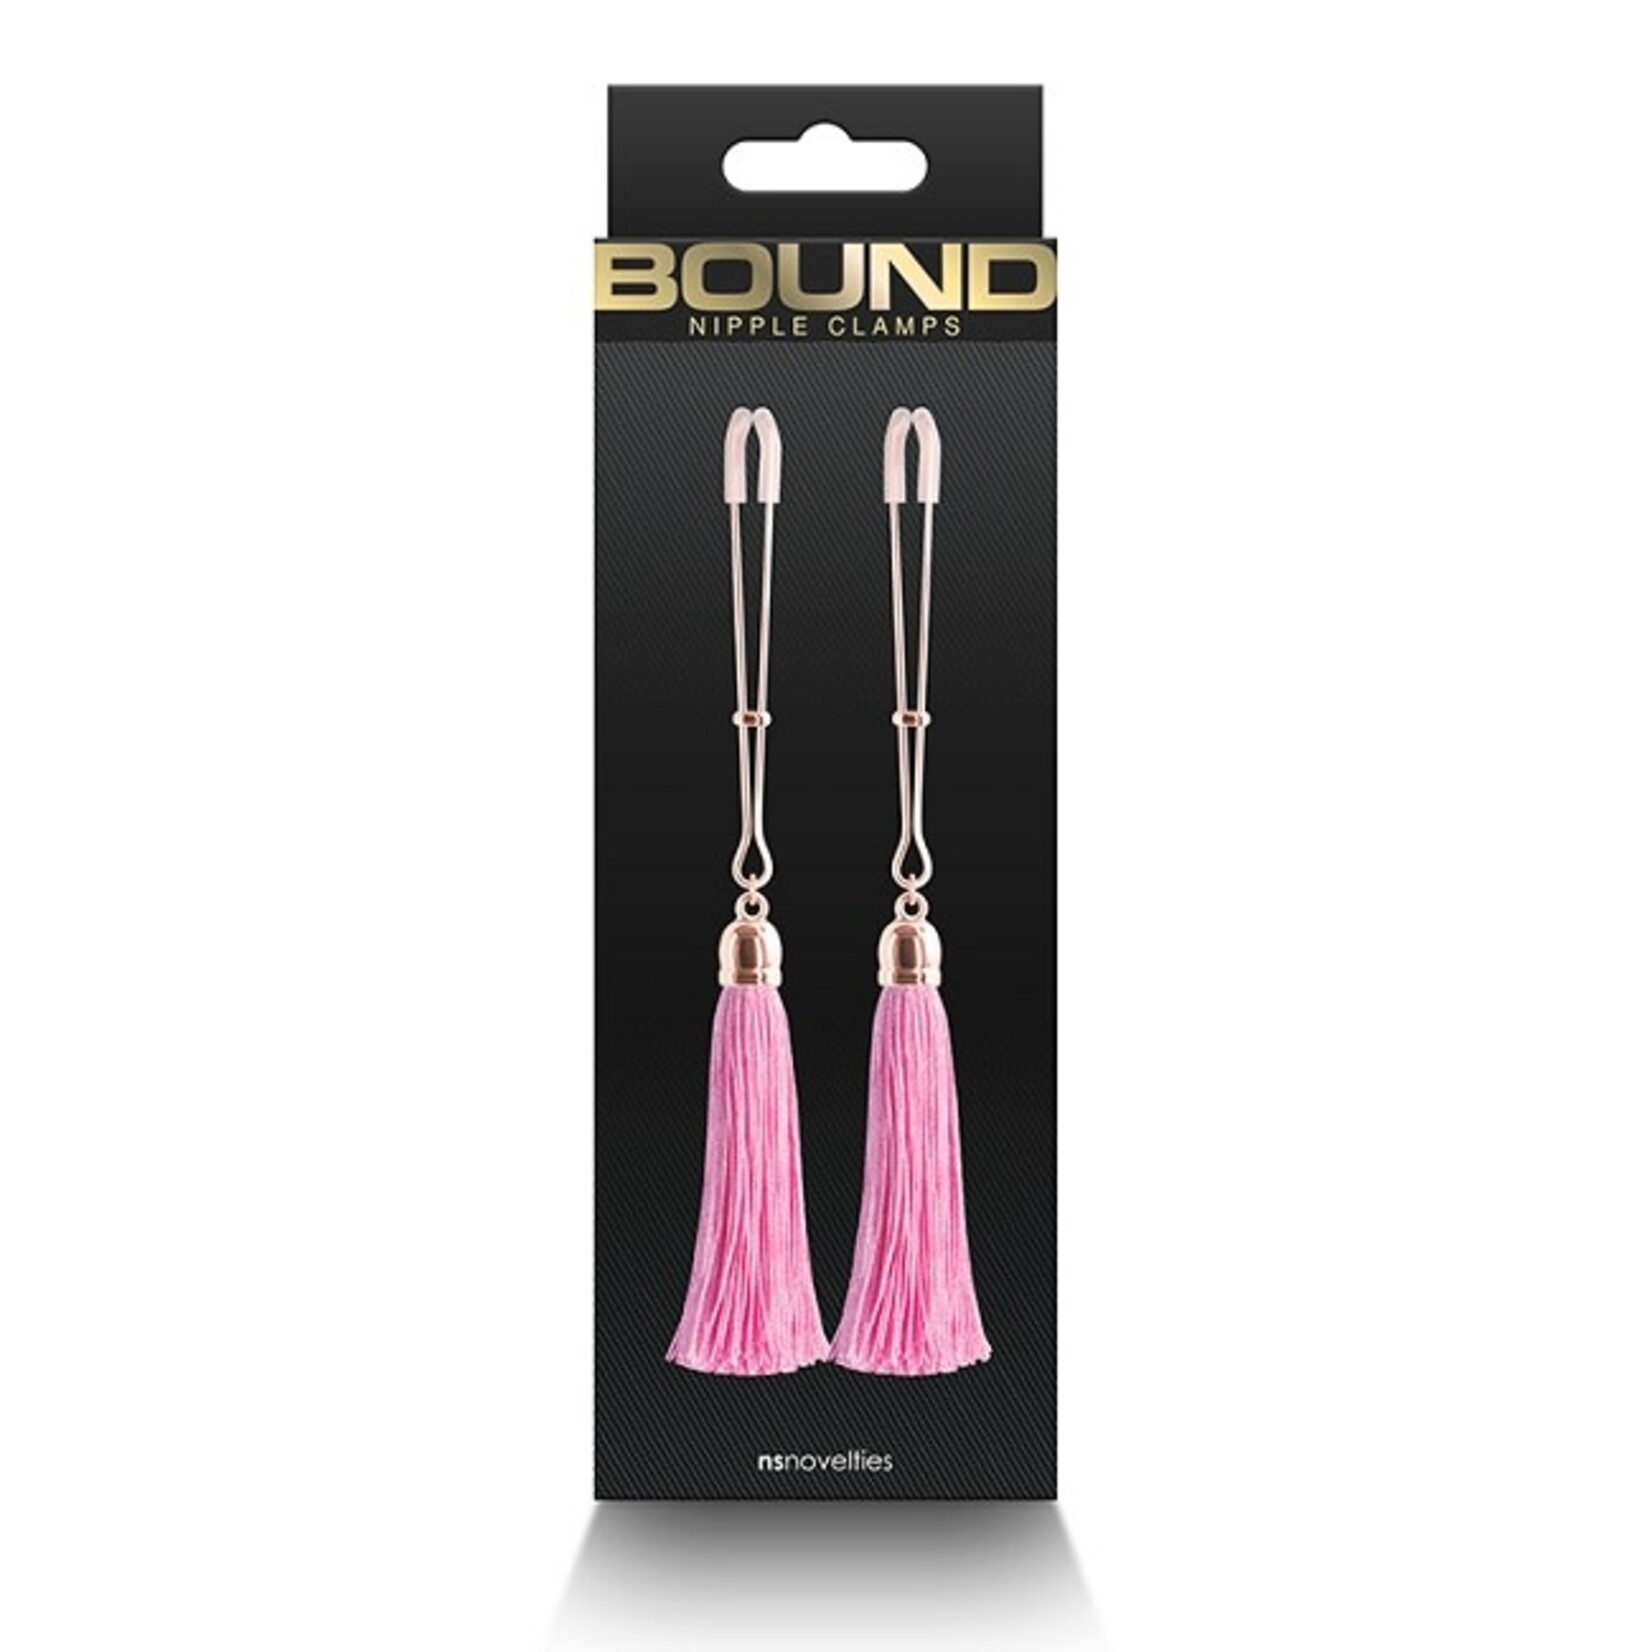 NS Novelties Bound - Nipple Clamps - T1